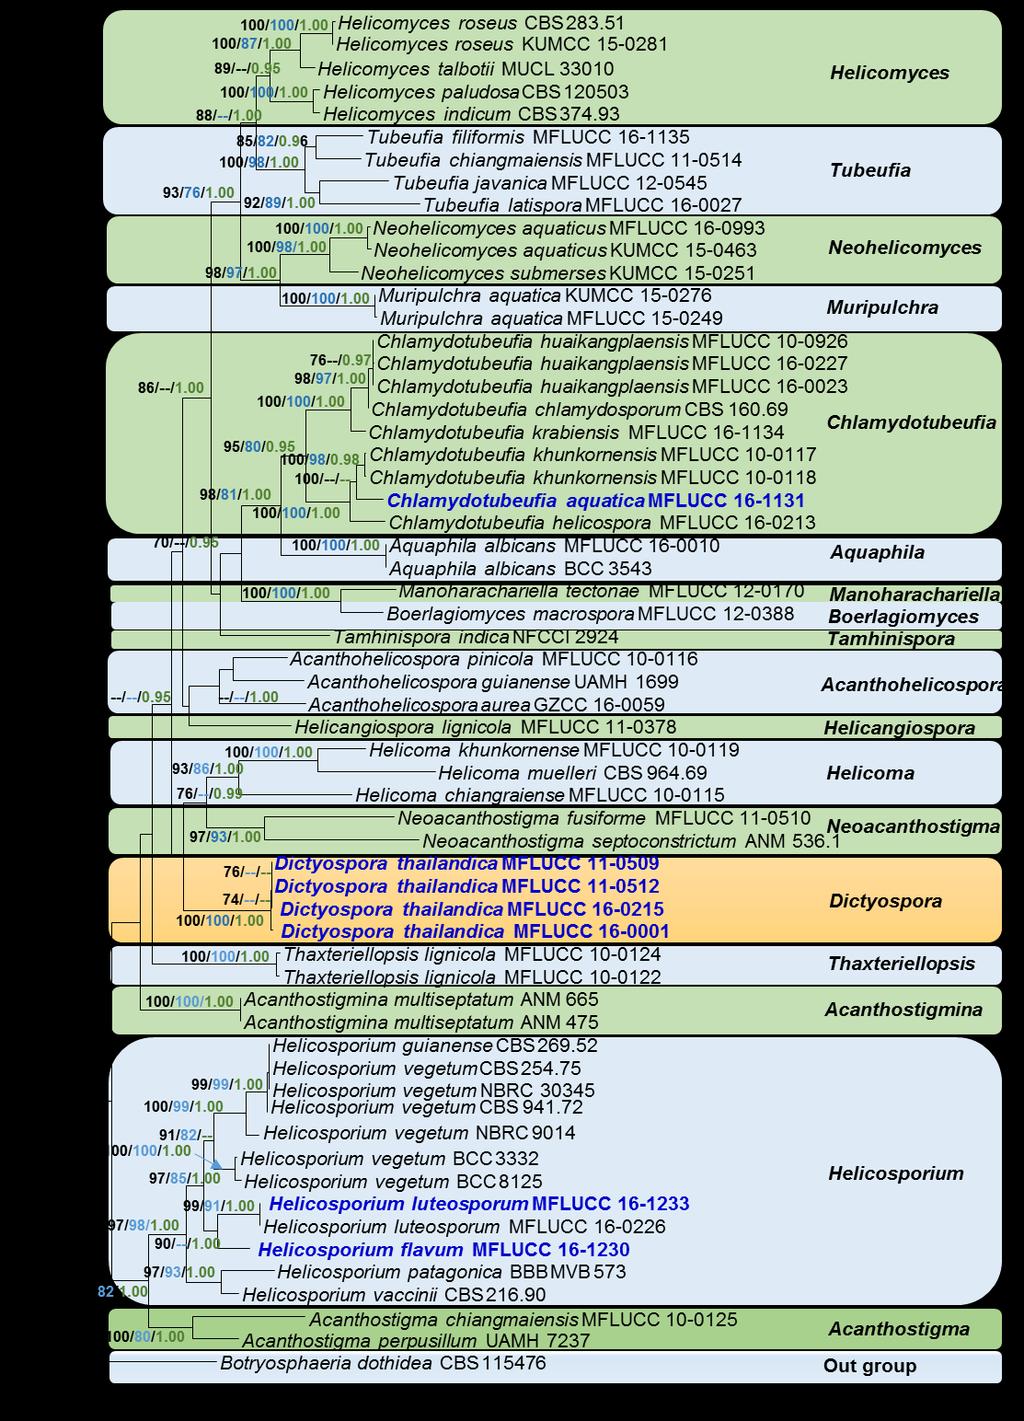 Fig.1 RAxML phylogenetic tree based on combined LSU, ITS and TEF1α sequence data from taxa of the family Tubeufiaceae.